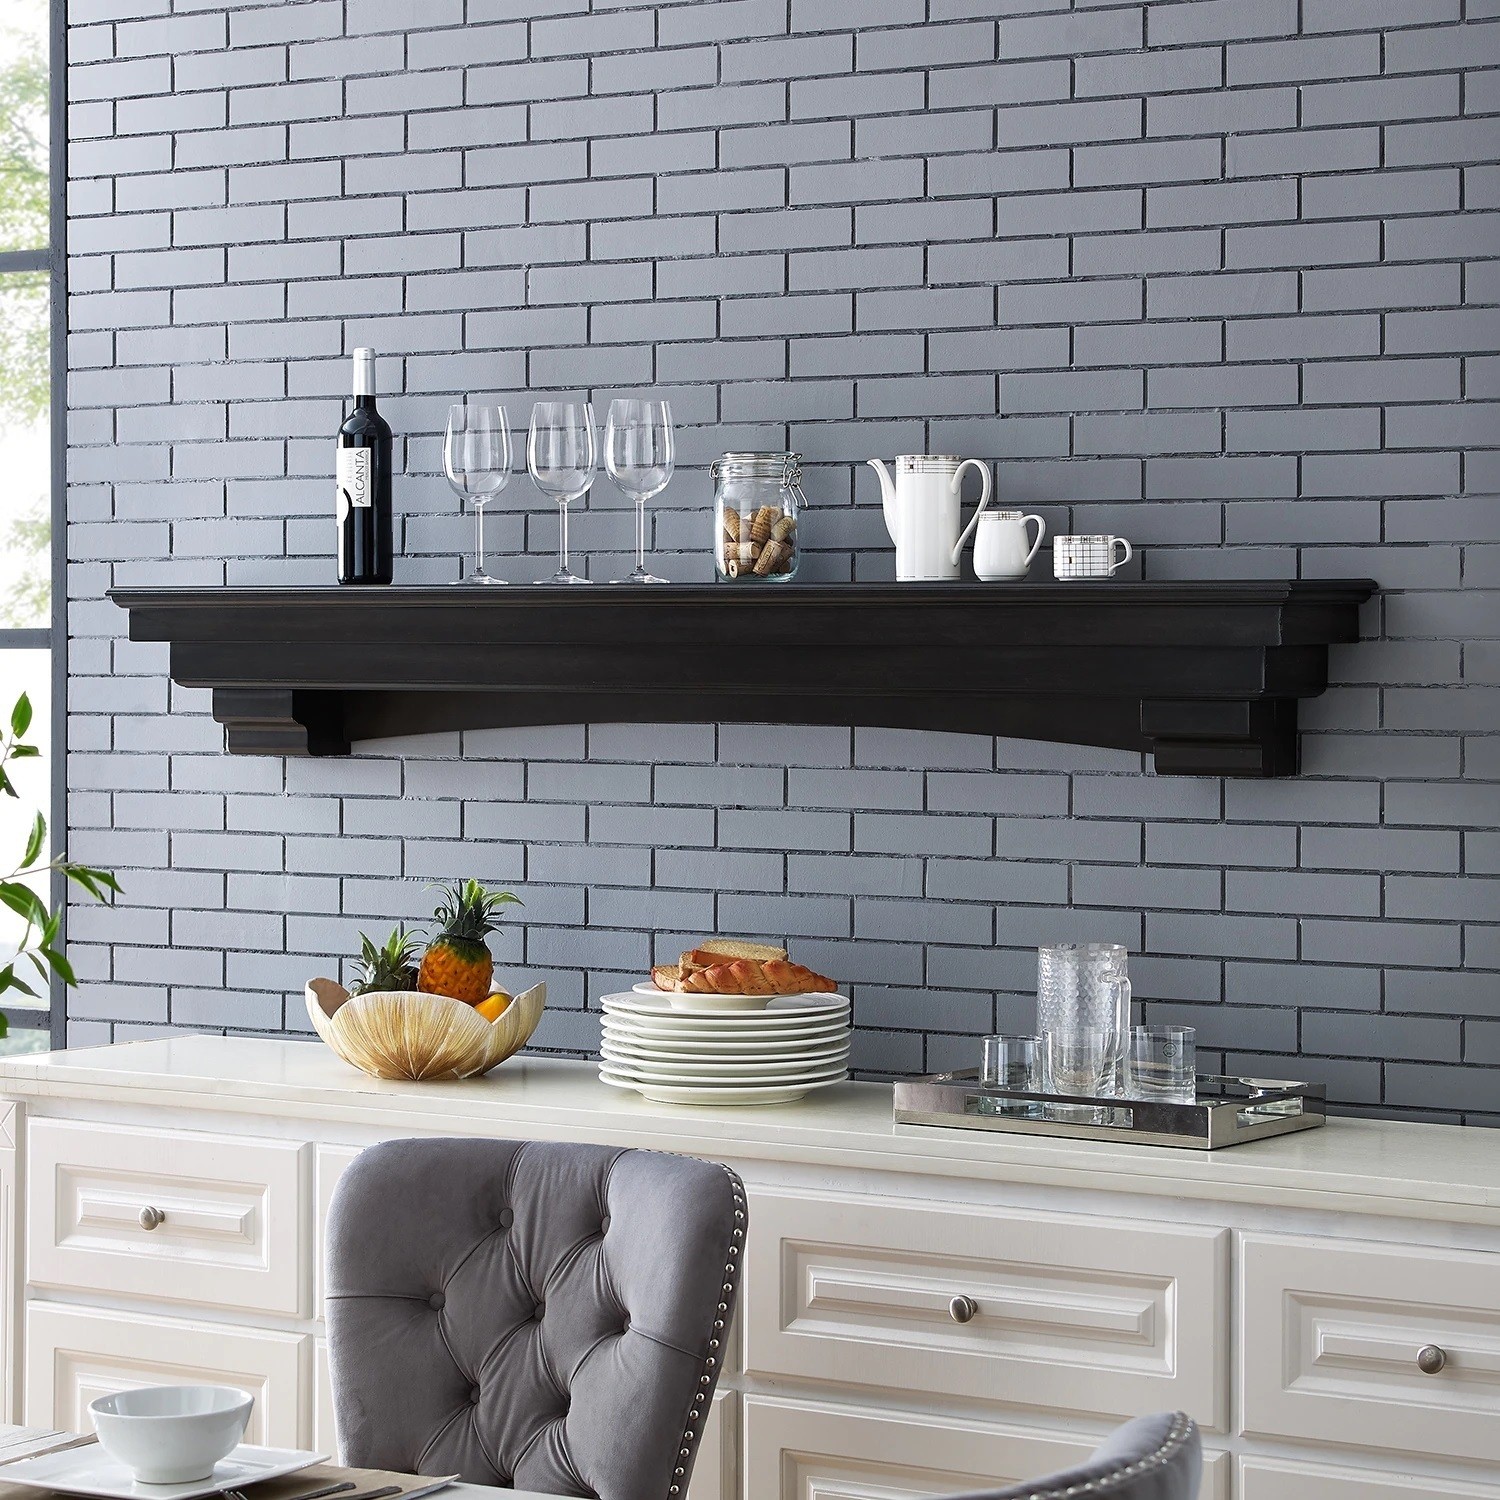 Extra long Arched Molding Shelf Mantel With Geometric Shaping